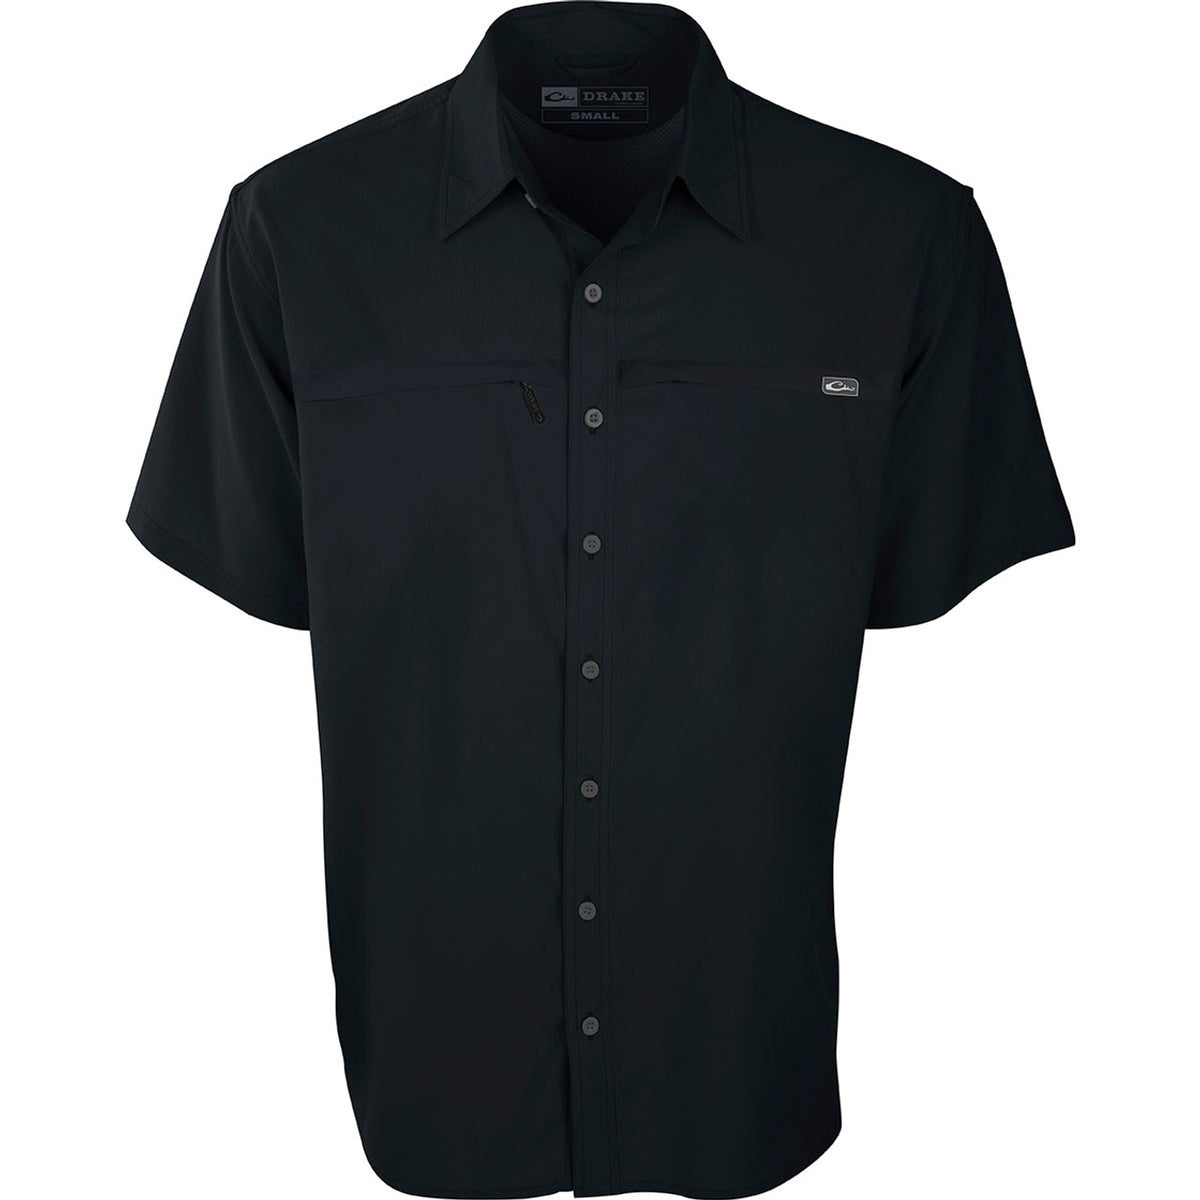 Town Lake s/s button up- Black